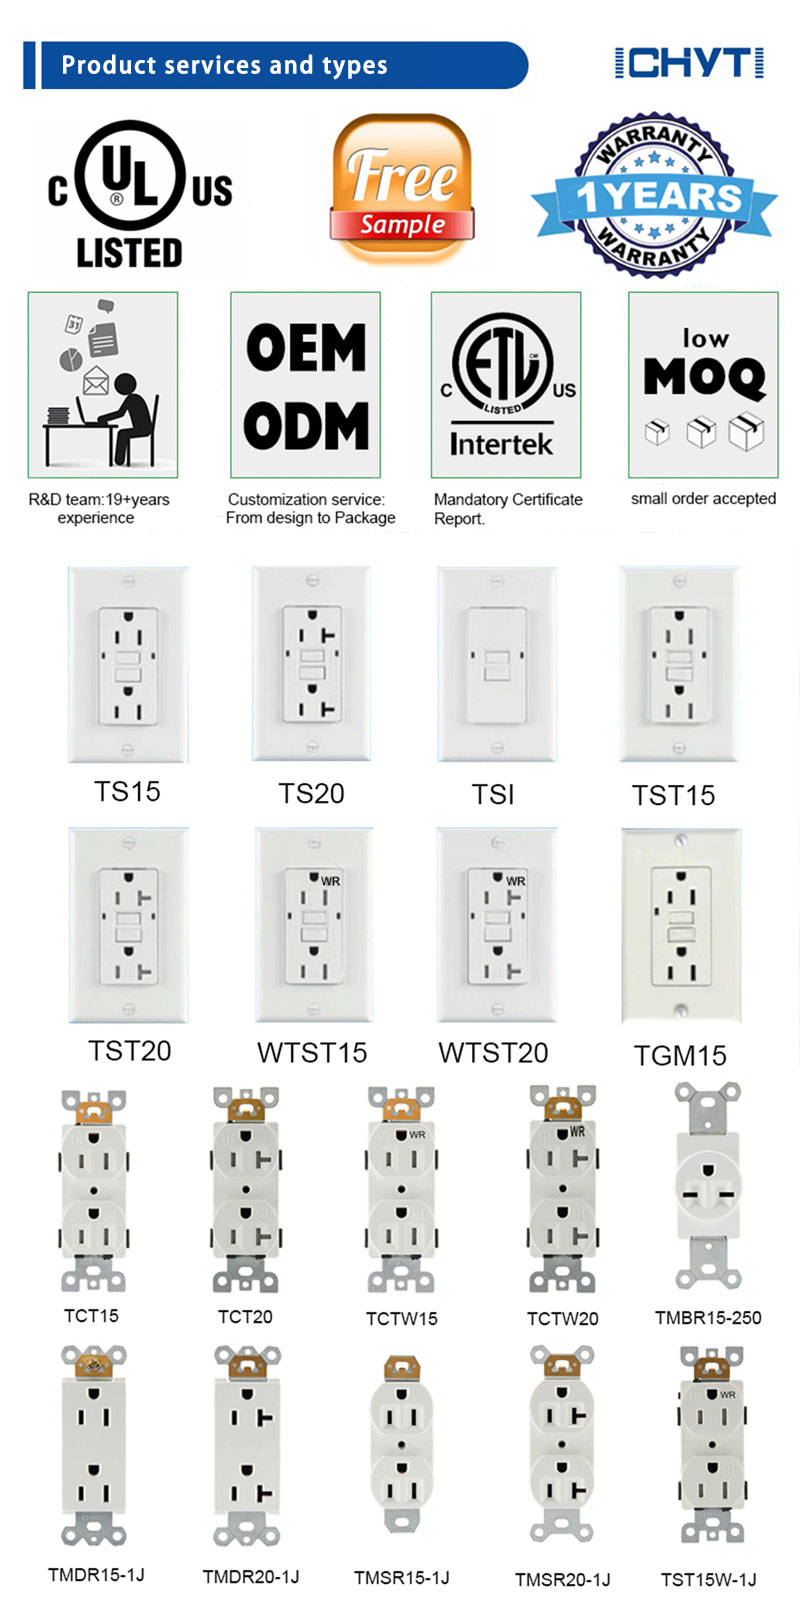 Ground Fault Circuit Interrupter Outlet